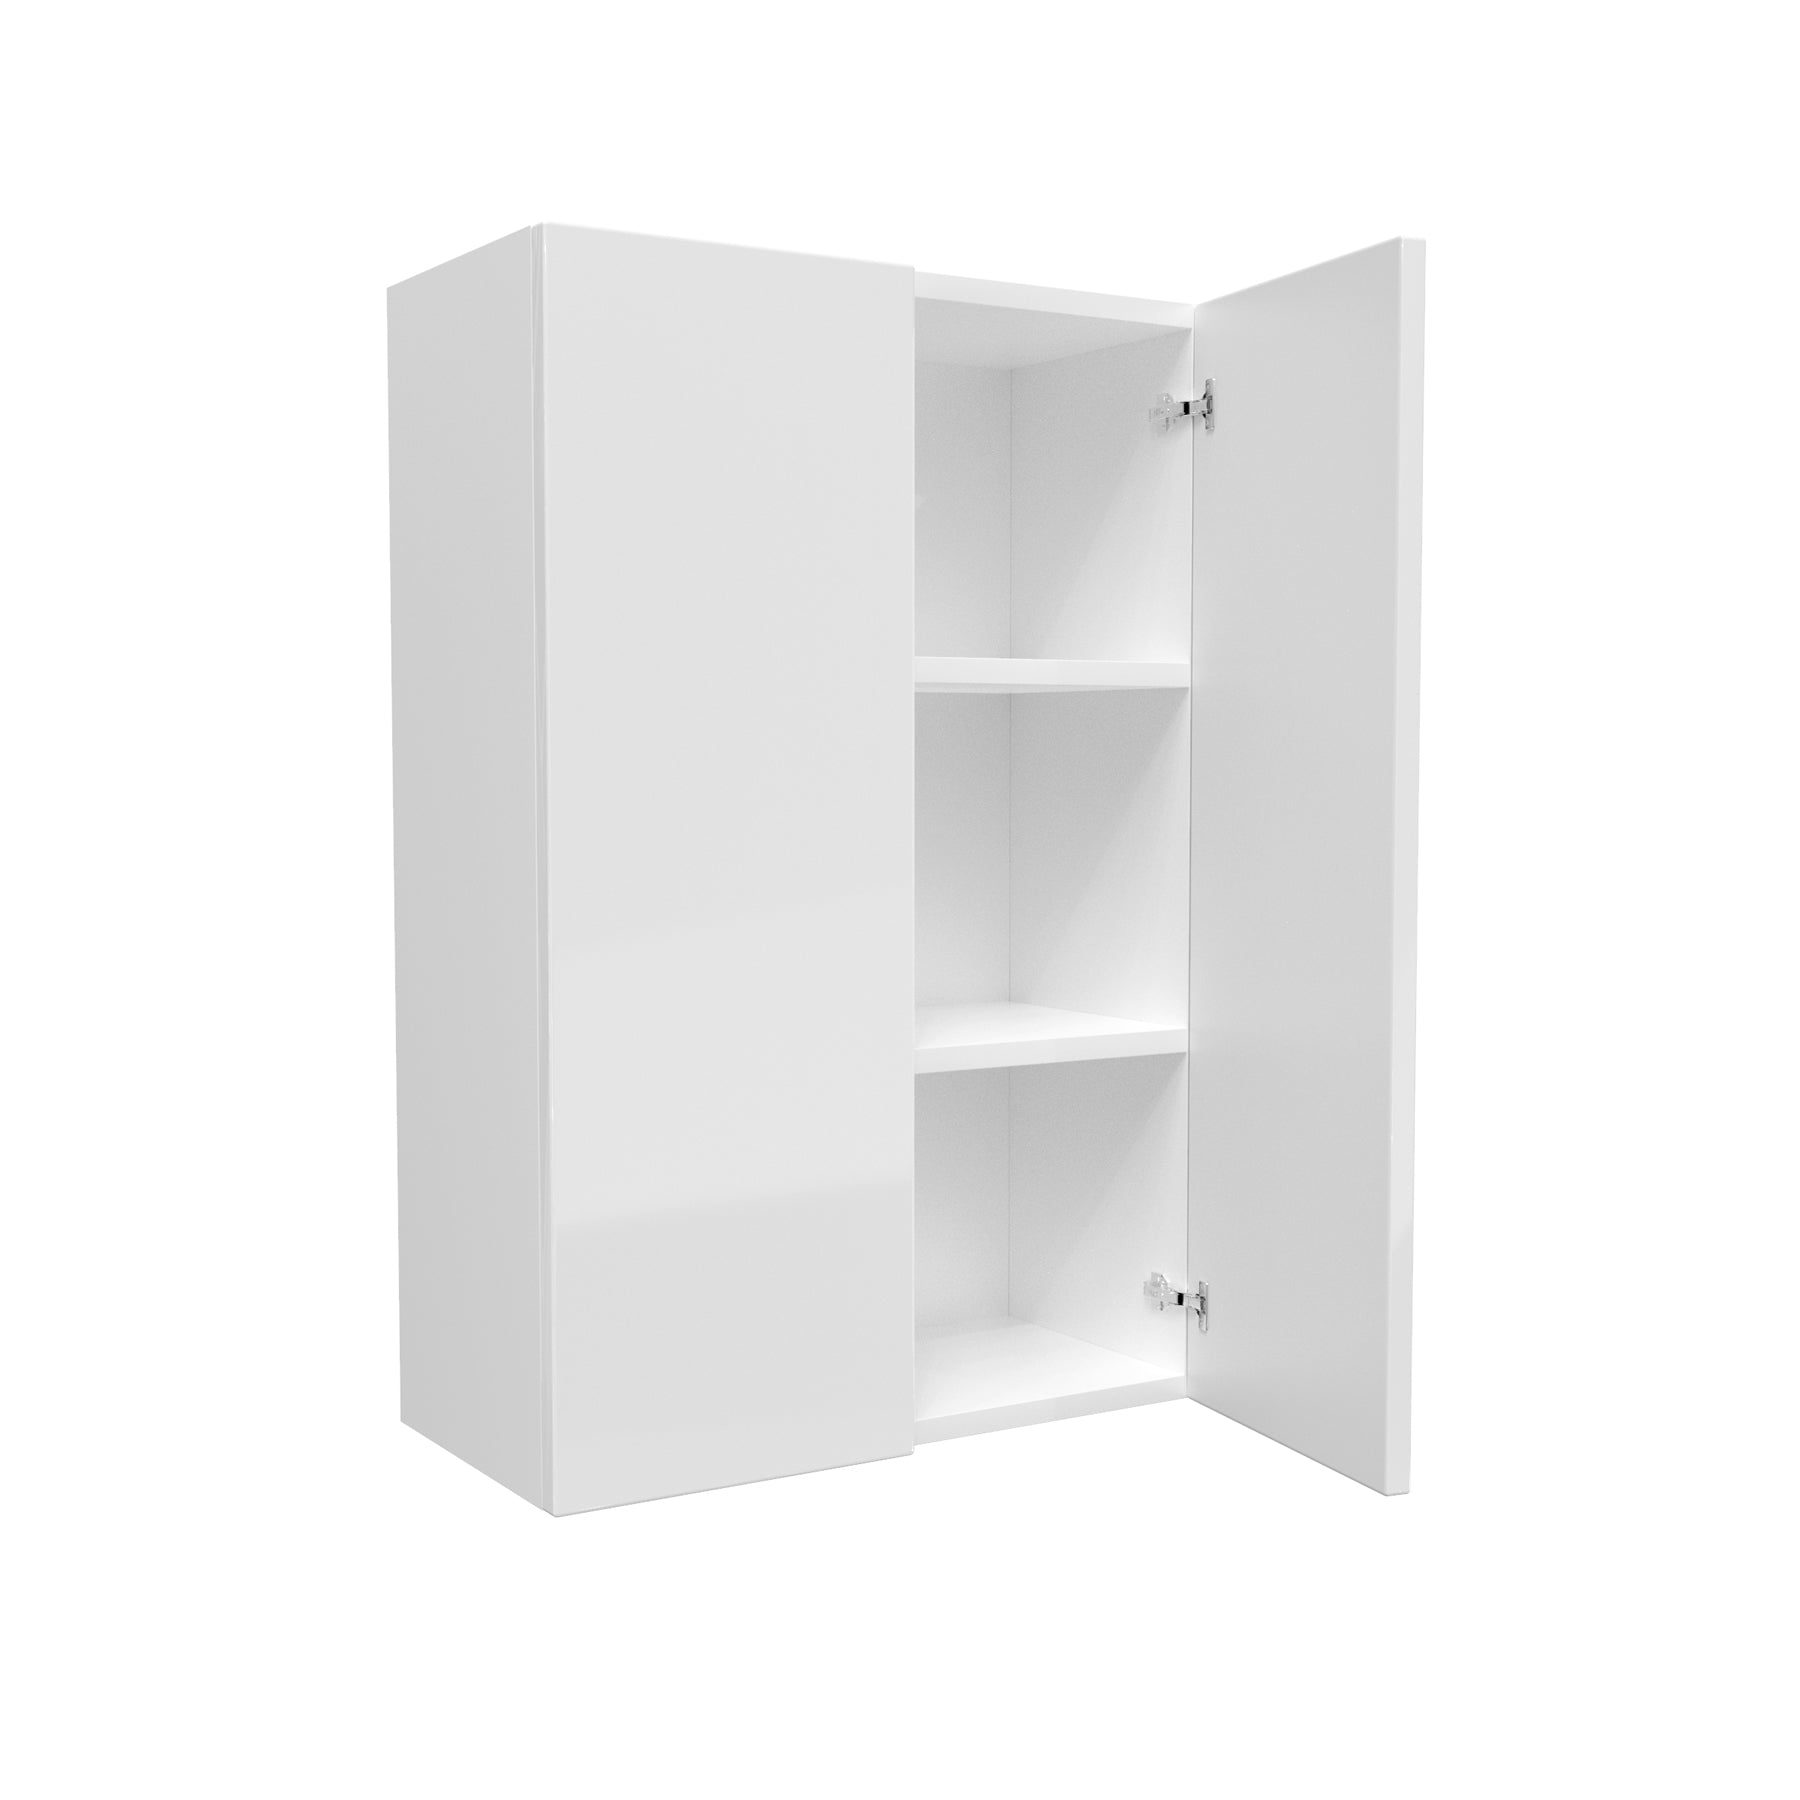 Double Door Wall Cabinet | Milano White | 24W x 36H x 12D